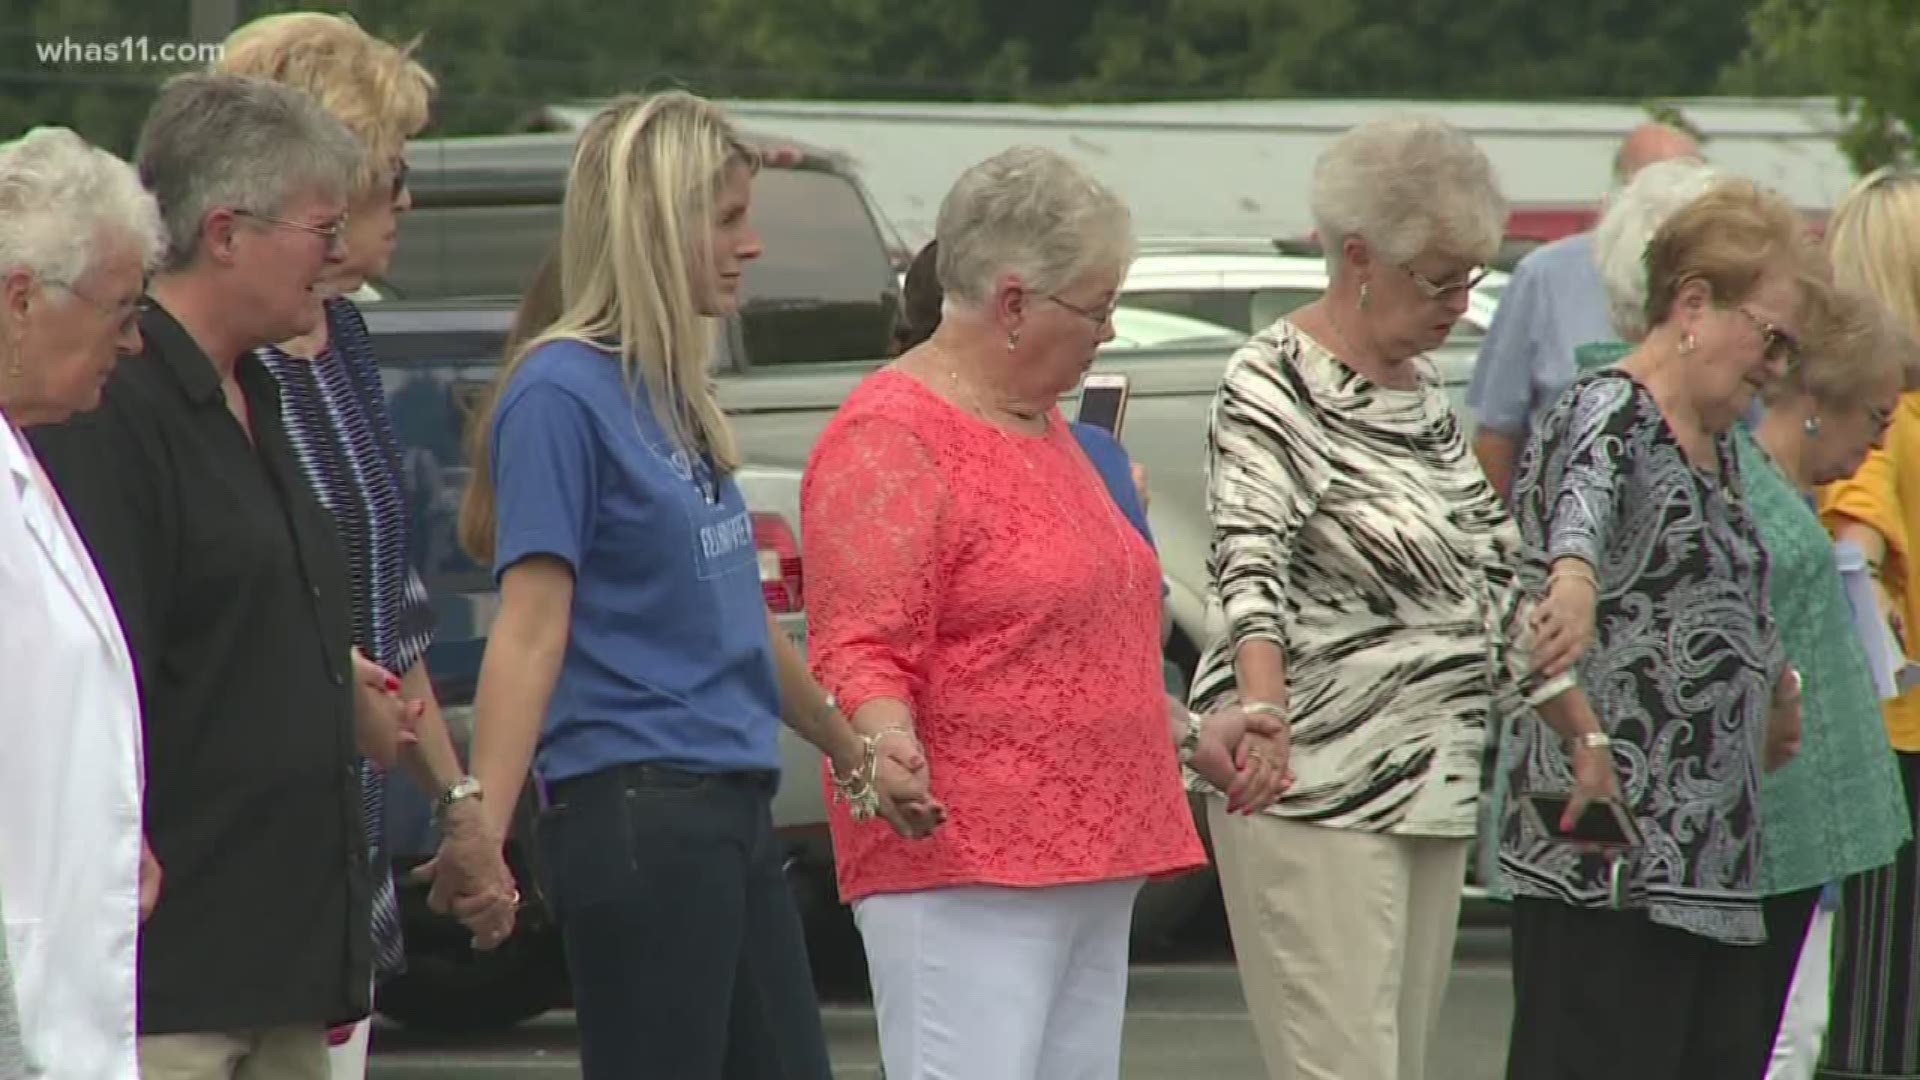 The Grandview Nursing and Rehabilitation Facility is under scrutiny by the state and the community is concerned for their loved ones